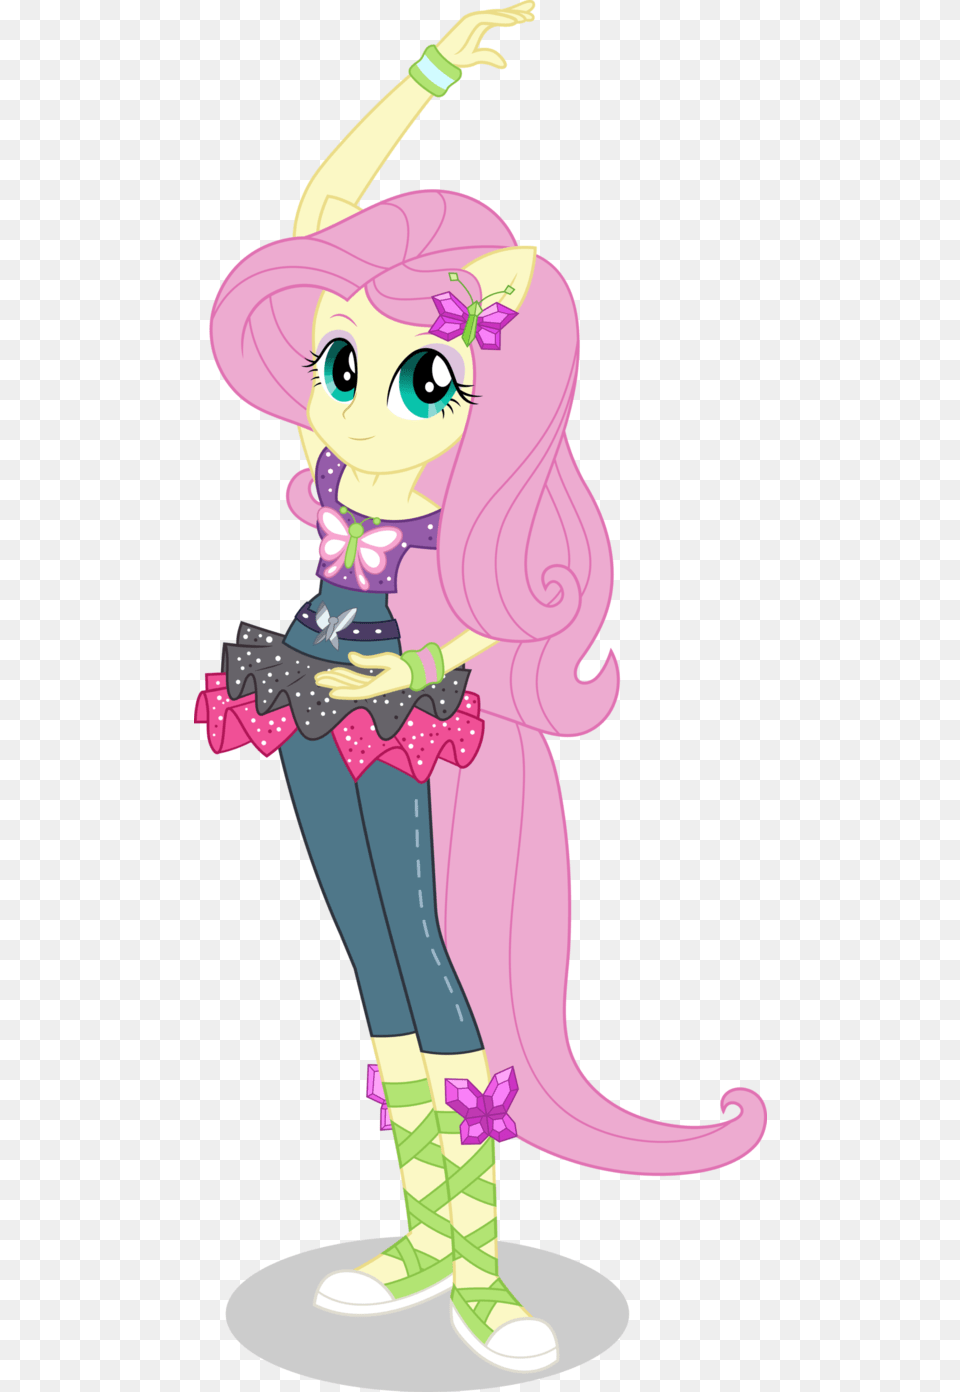 Fluttershy Images Dance Magic Fluttershy By Icantunloveyou My Little Pony Equestria Girls Dance Magic Fluttershy, Book, Publication, Comics, Person Png Image